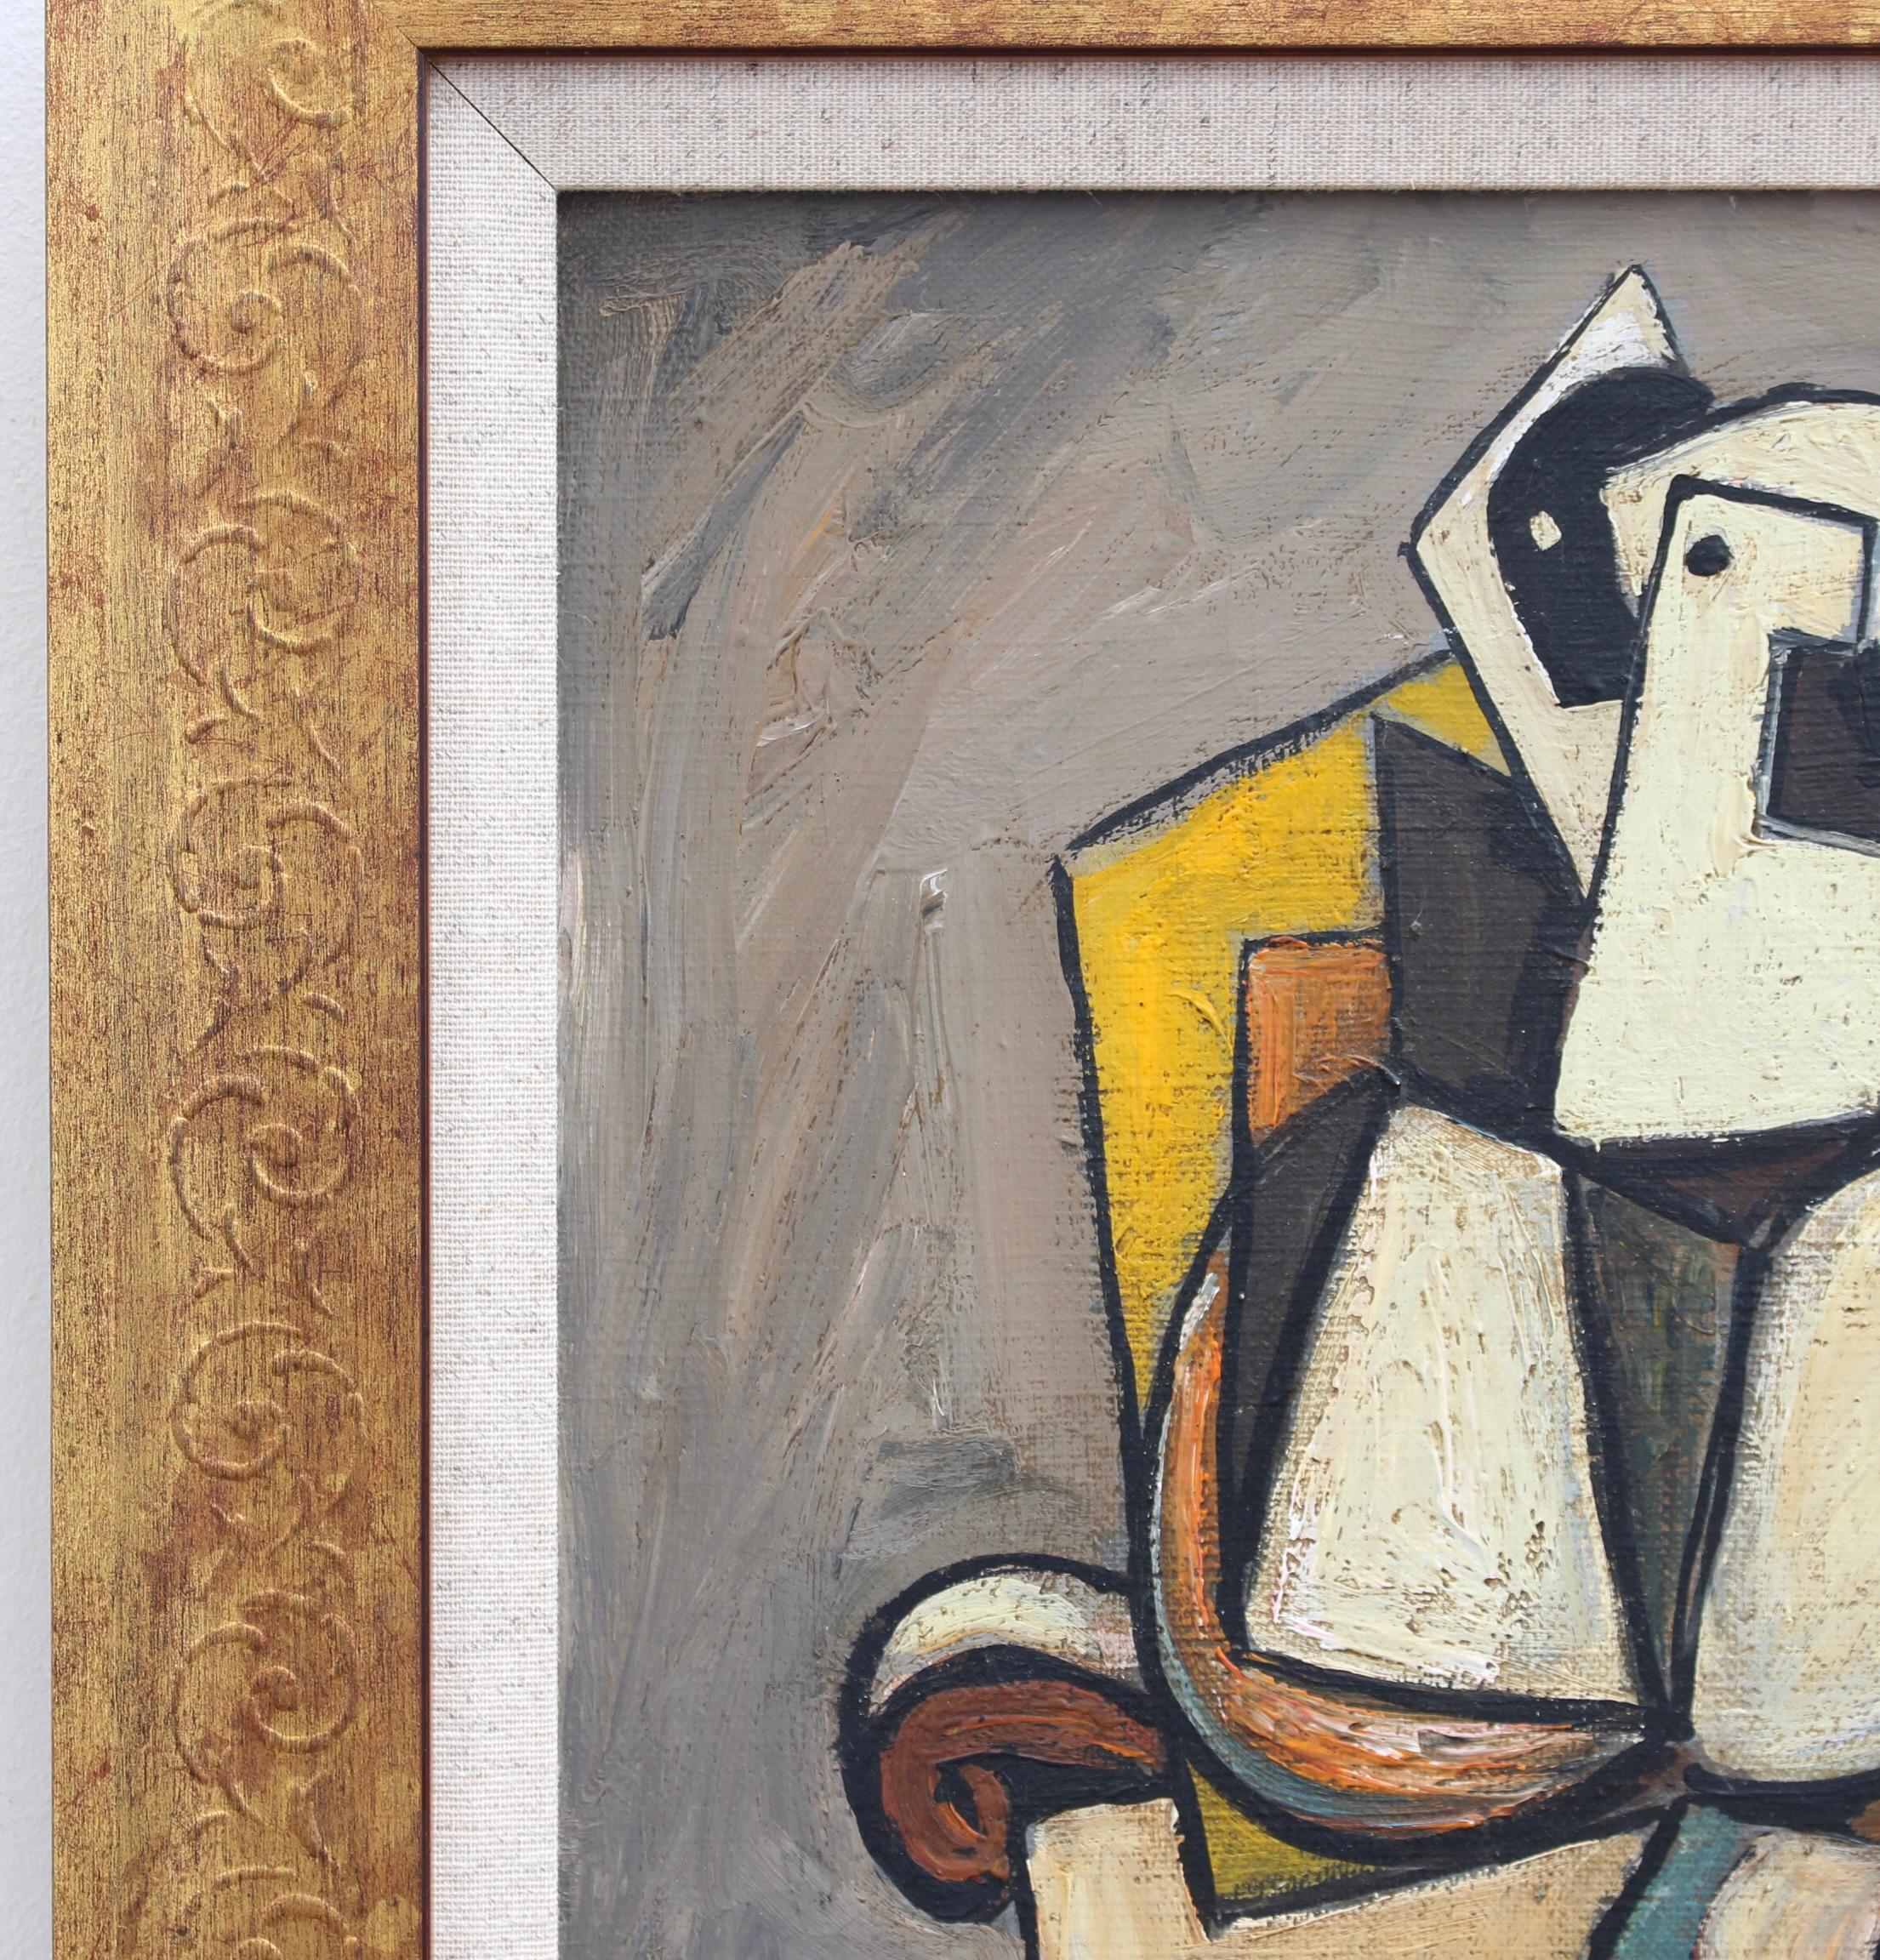 'Portrait of a Seated Man', oil on canvas, German School (circa 1970s). A richly coloured portrait of a figure painted in the style of expressionists / cubists of the era. The sensuous hues - brown, yellow, orange, beige and a touch of creamy white